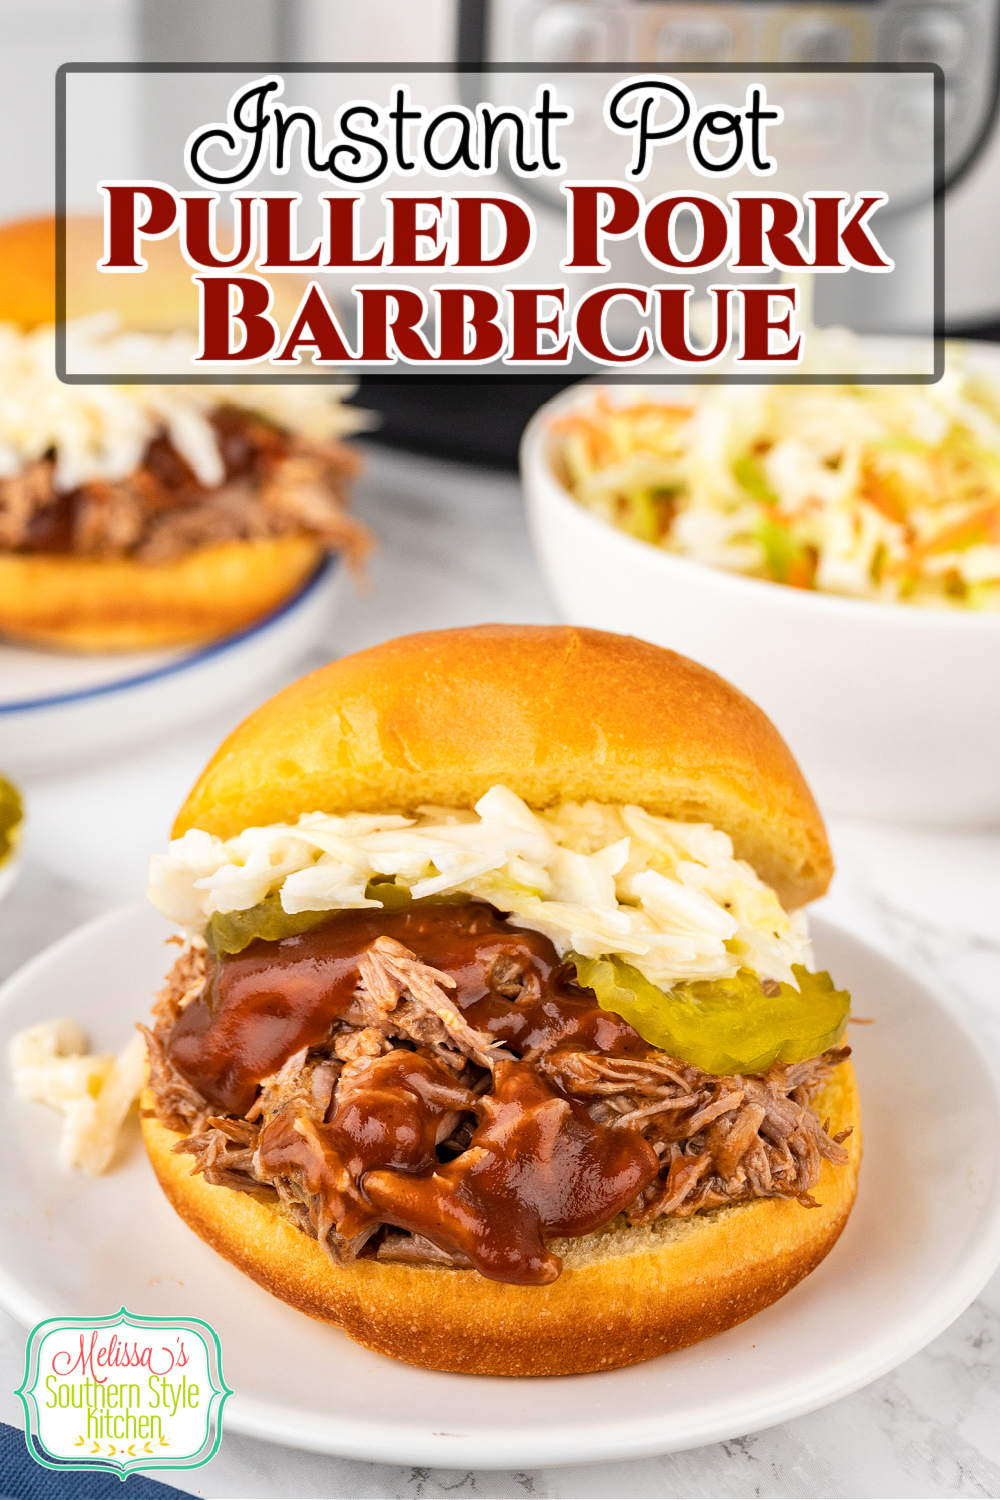 Cook this Pulled Pork in your Instant Pot for a tender and succulent barbecue feast #instantpot #instantpotrecipe #pulledpork #bestpulledpork #pulledporkrecipe #porkshoulder, #porkrecipes #choppedbarbecue